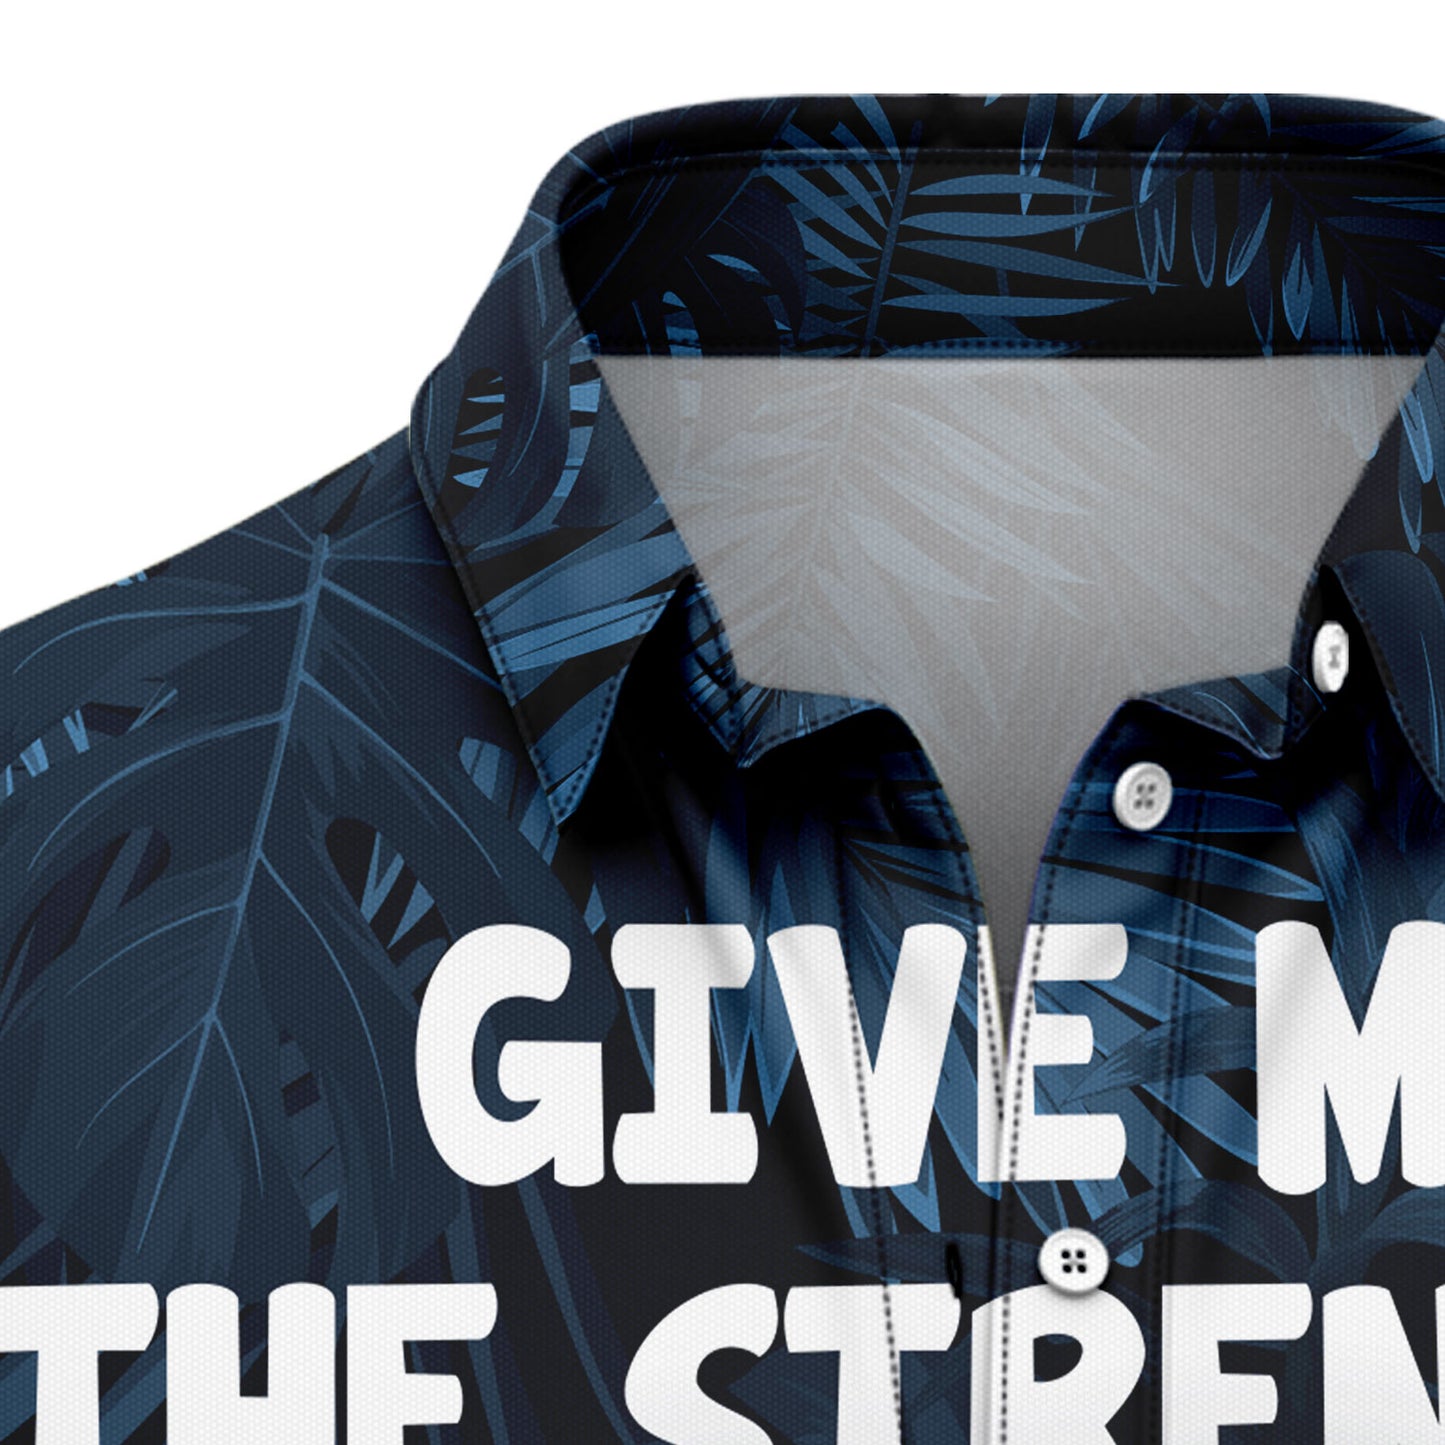 Give Me The Strength To Walk Away From Stupid People Cat H237002 Hawaiian Shirt